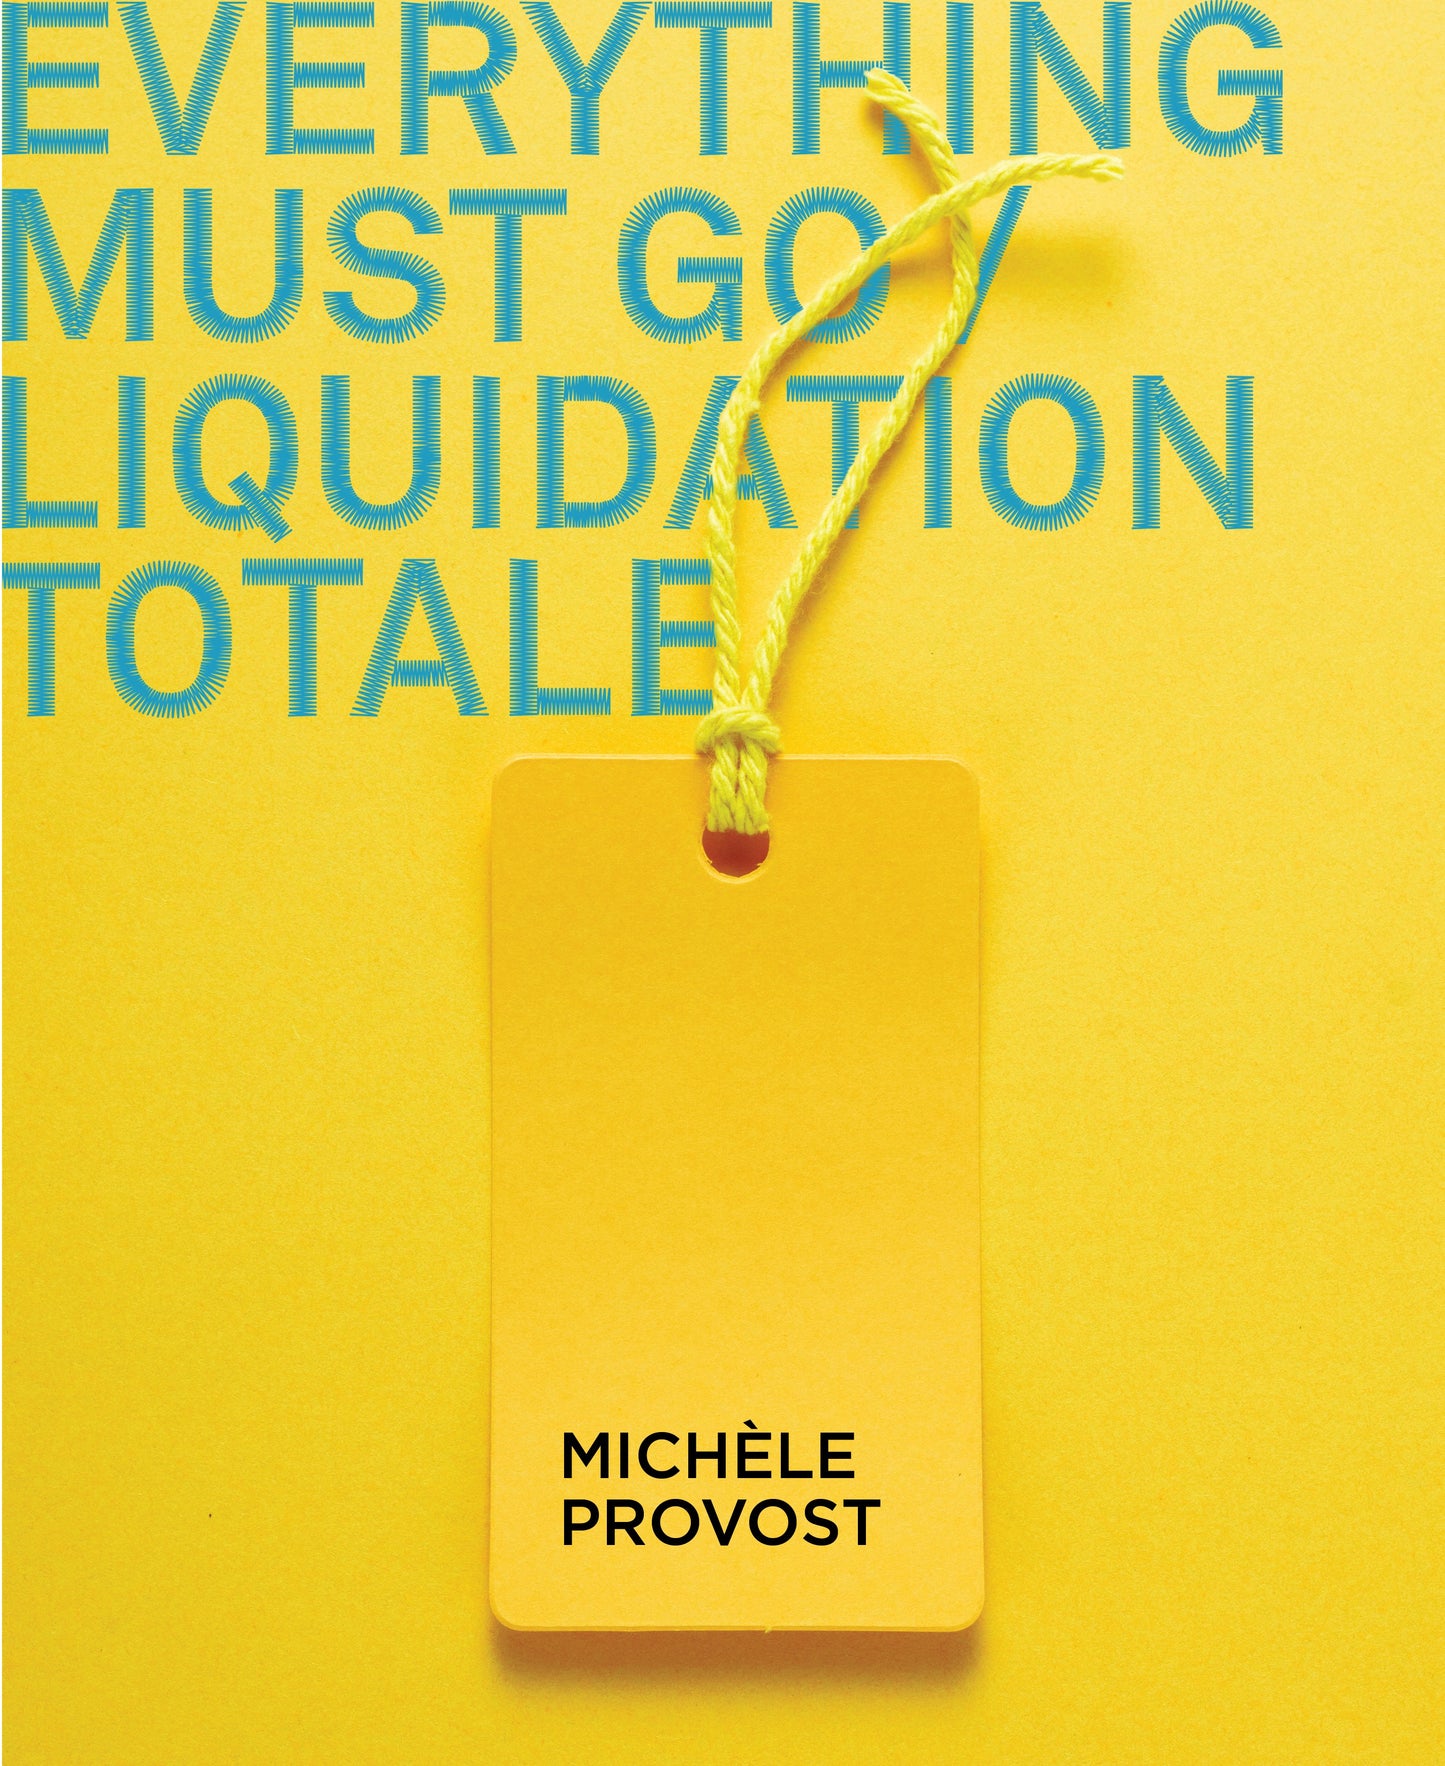 Michèle Provost : Everything must go /  Liquidation Totale